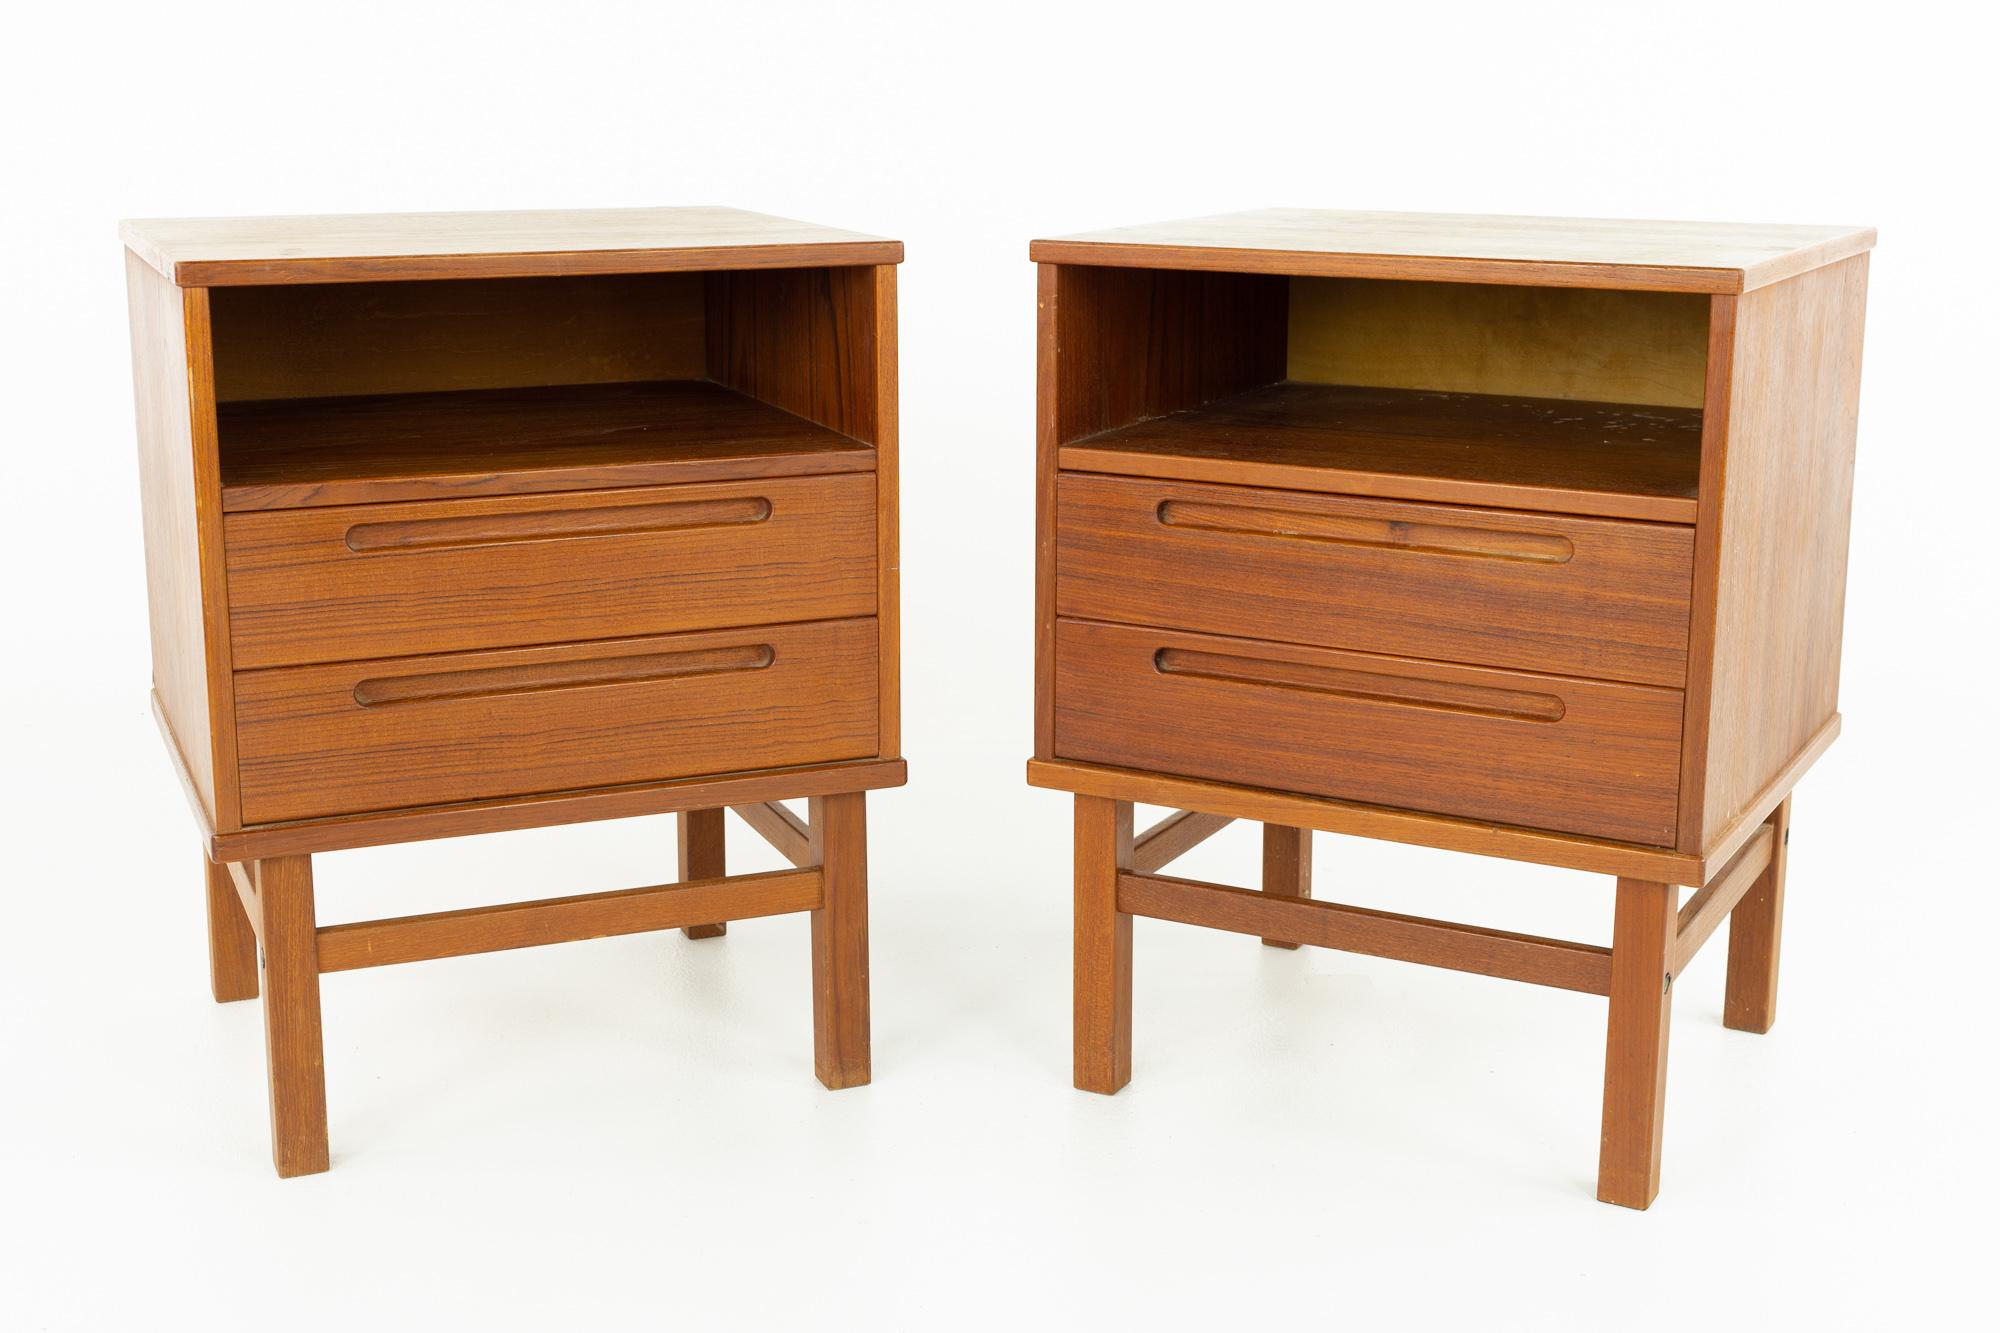 Peter Lovig Nielsen mid century teak nightstands - Pair

These nightstands measure: 19.5 wide x 17.25 deep x 25.25 inches high

?All pieces of furniture can be had in what we call restored vintage condition. That means the piece is restored upon